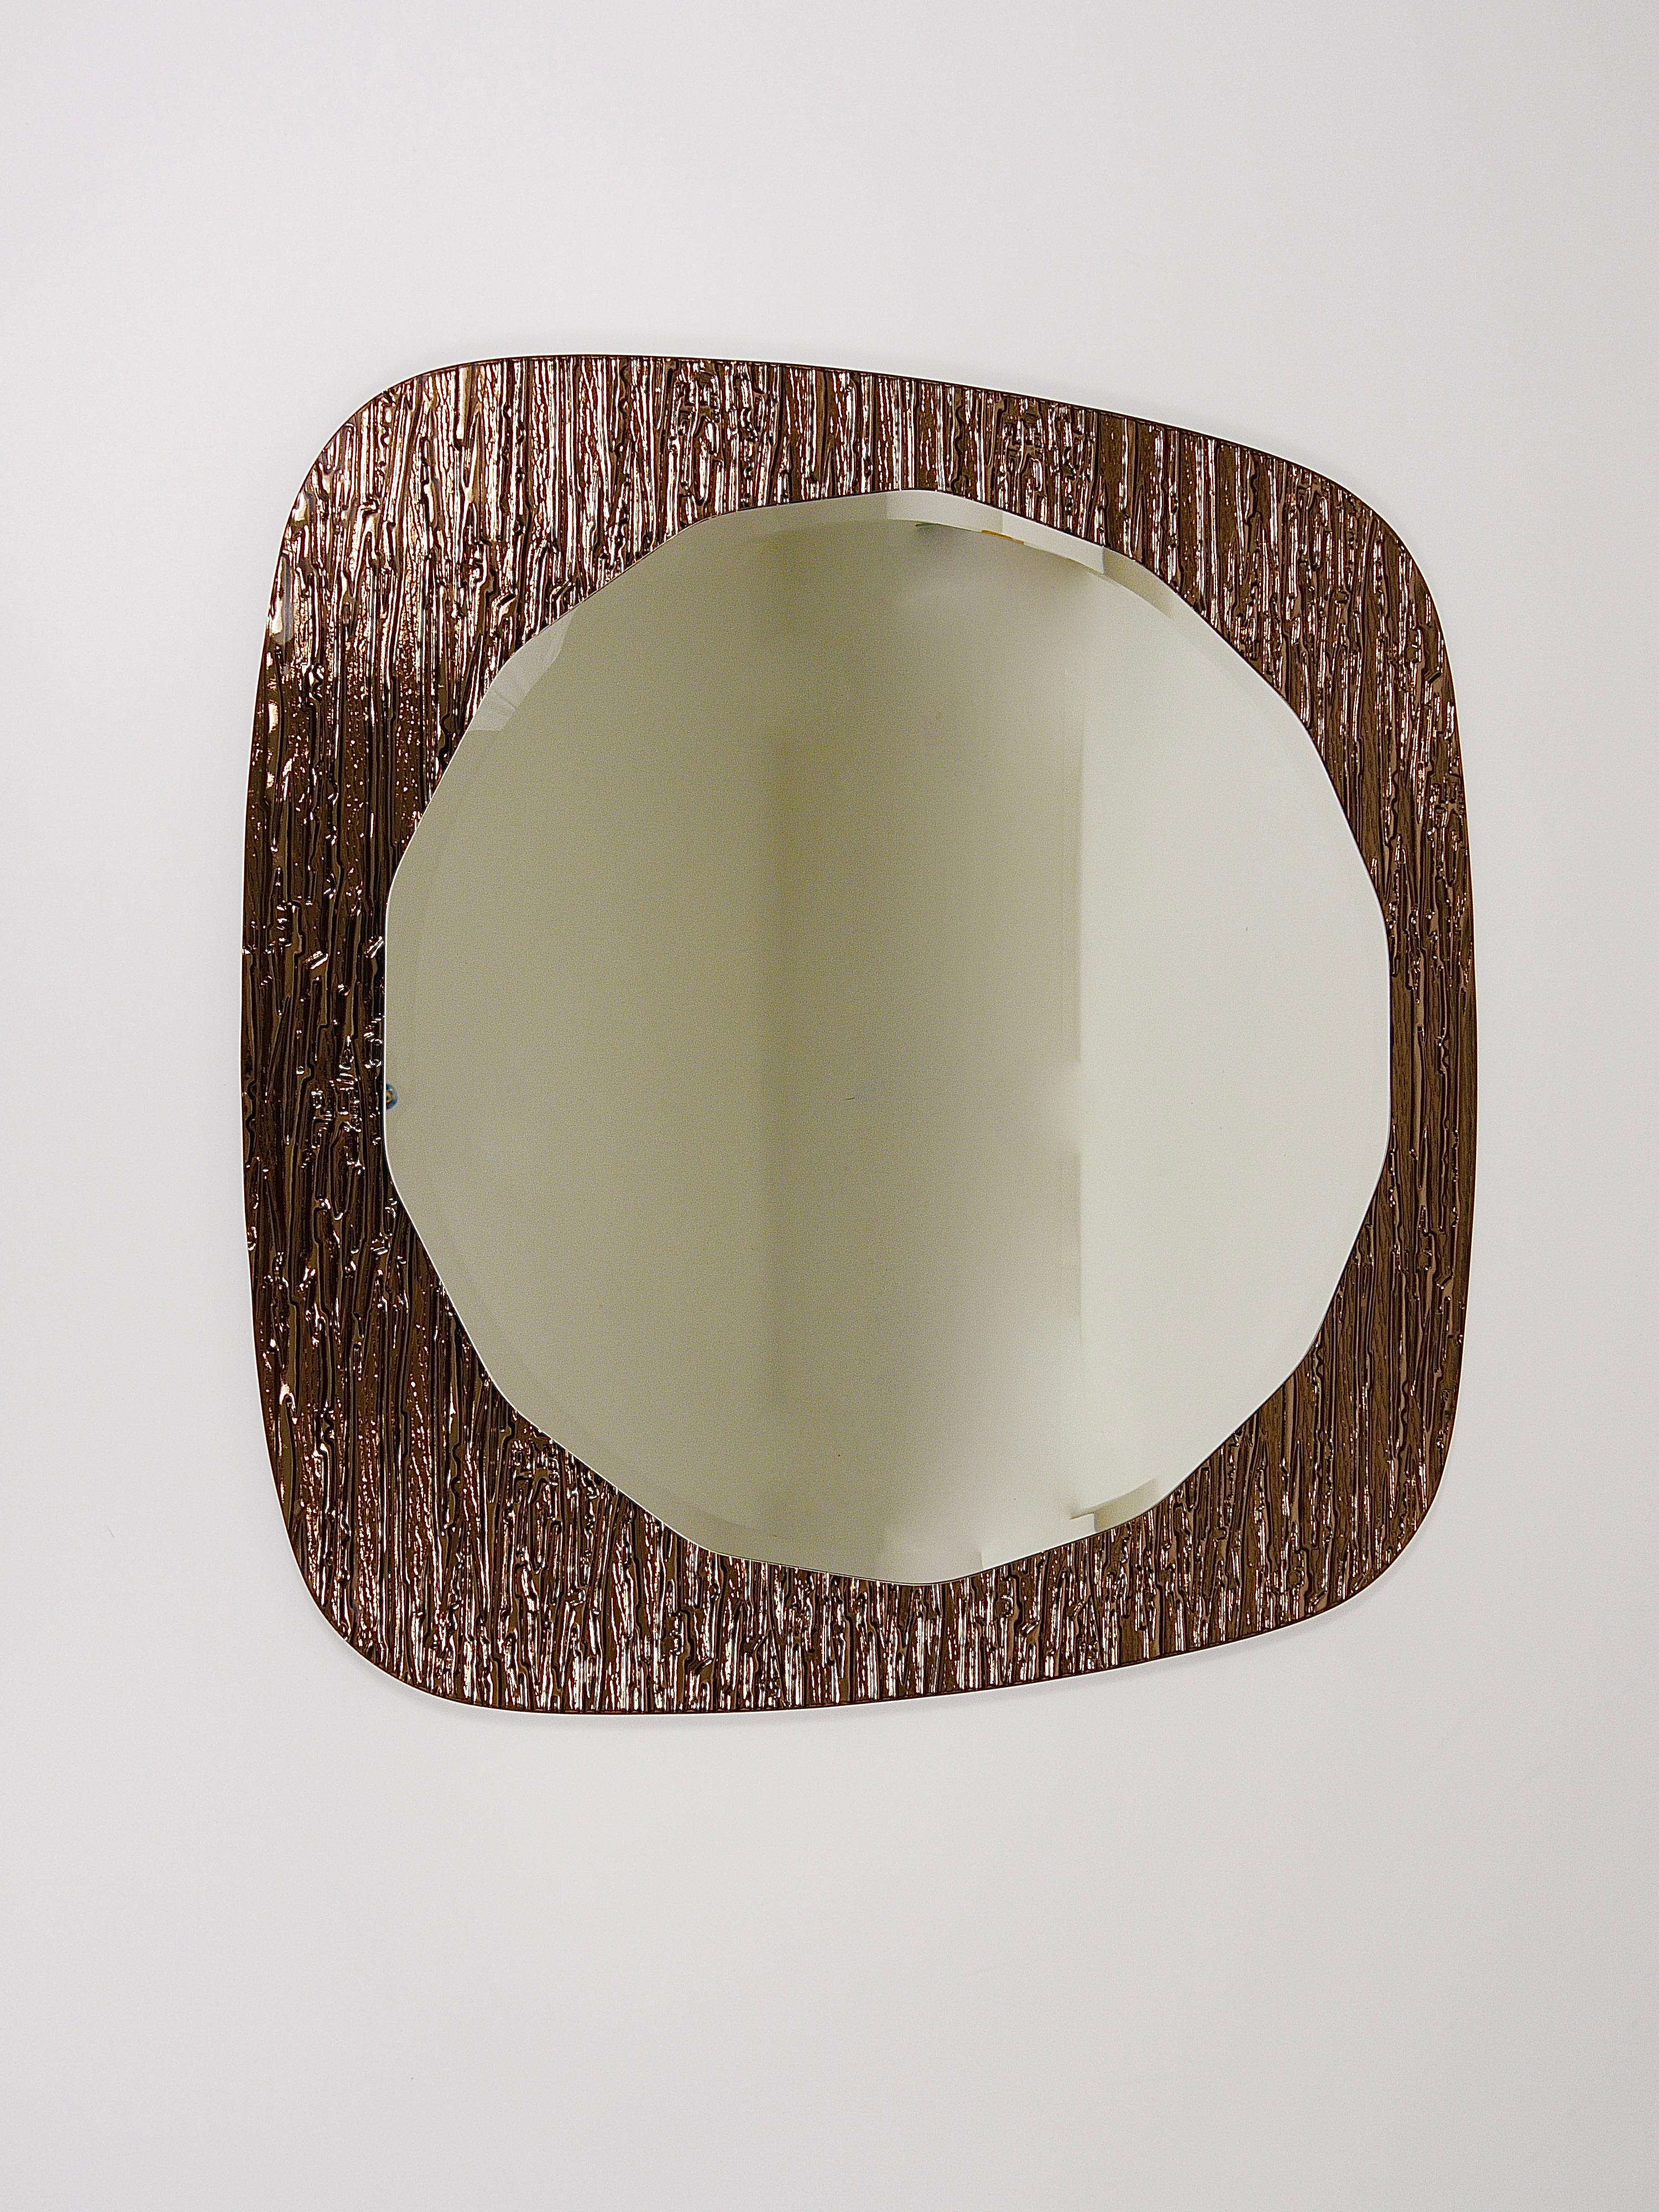 An impressive and premium-quality double-levelled Italian wall mirror from the 1960s, made in Italy by Cristal Arte / Crystal Arte. It features a round scalloped and faceted mirror on a brown bronze goldish backplate mirror glass. The backplate has